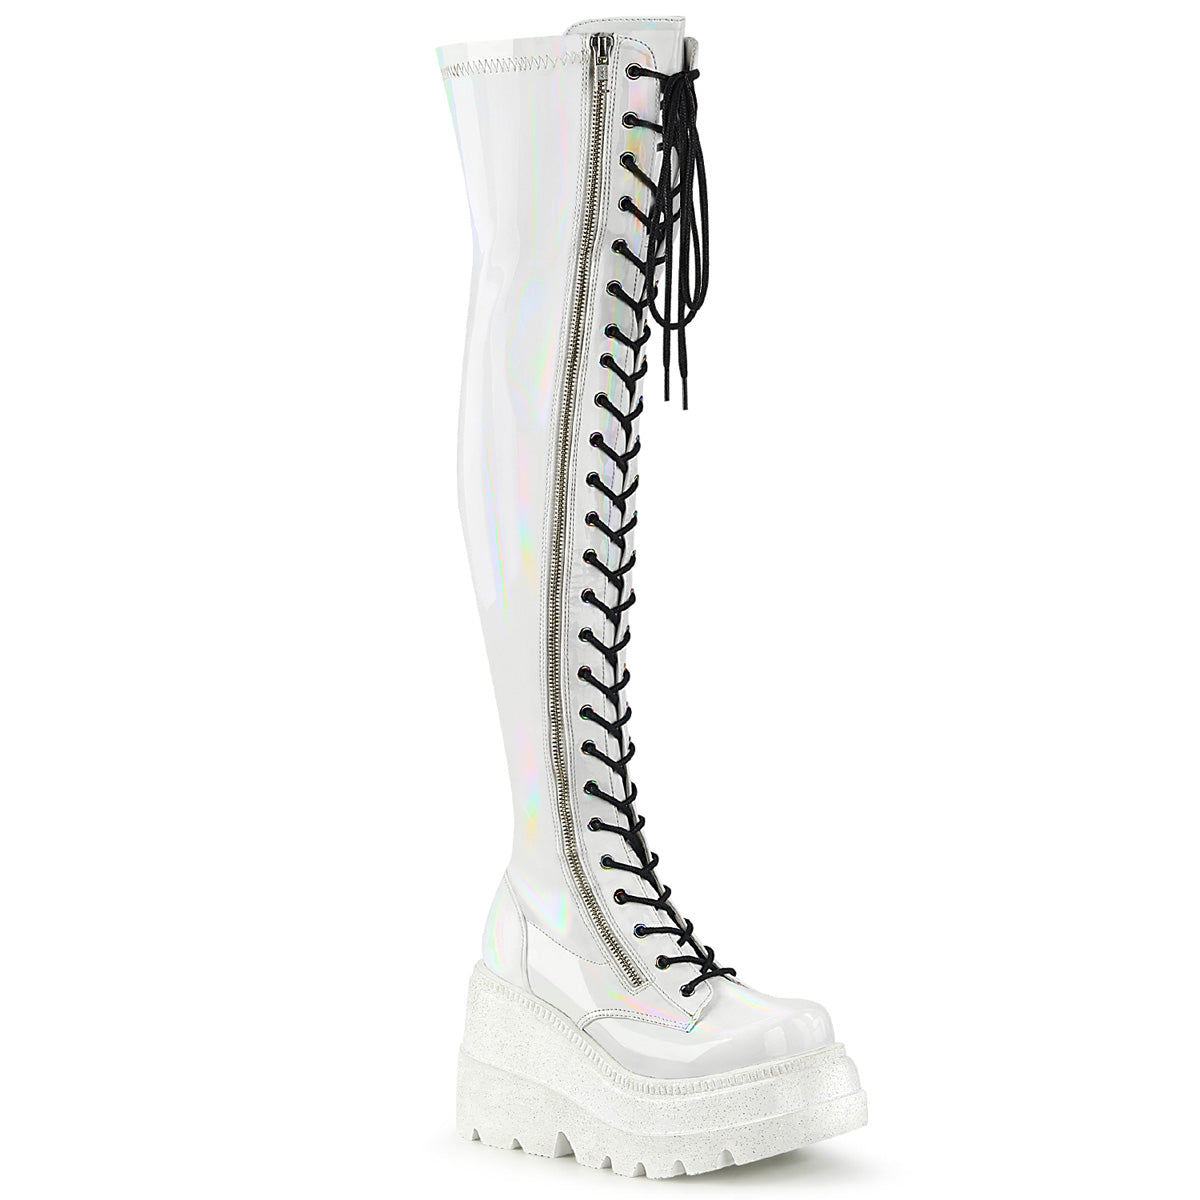 DemoniaCult Womens Boots SHAKER-374 Wht Hologram Stretch Patent